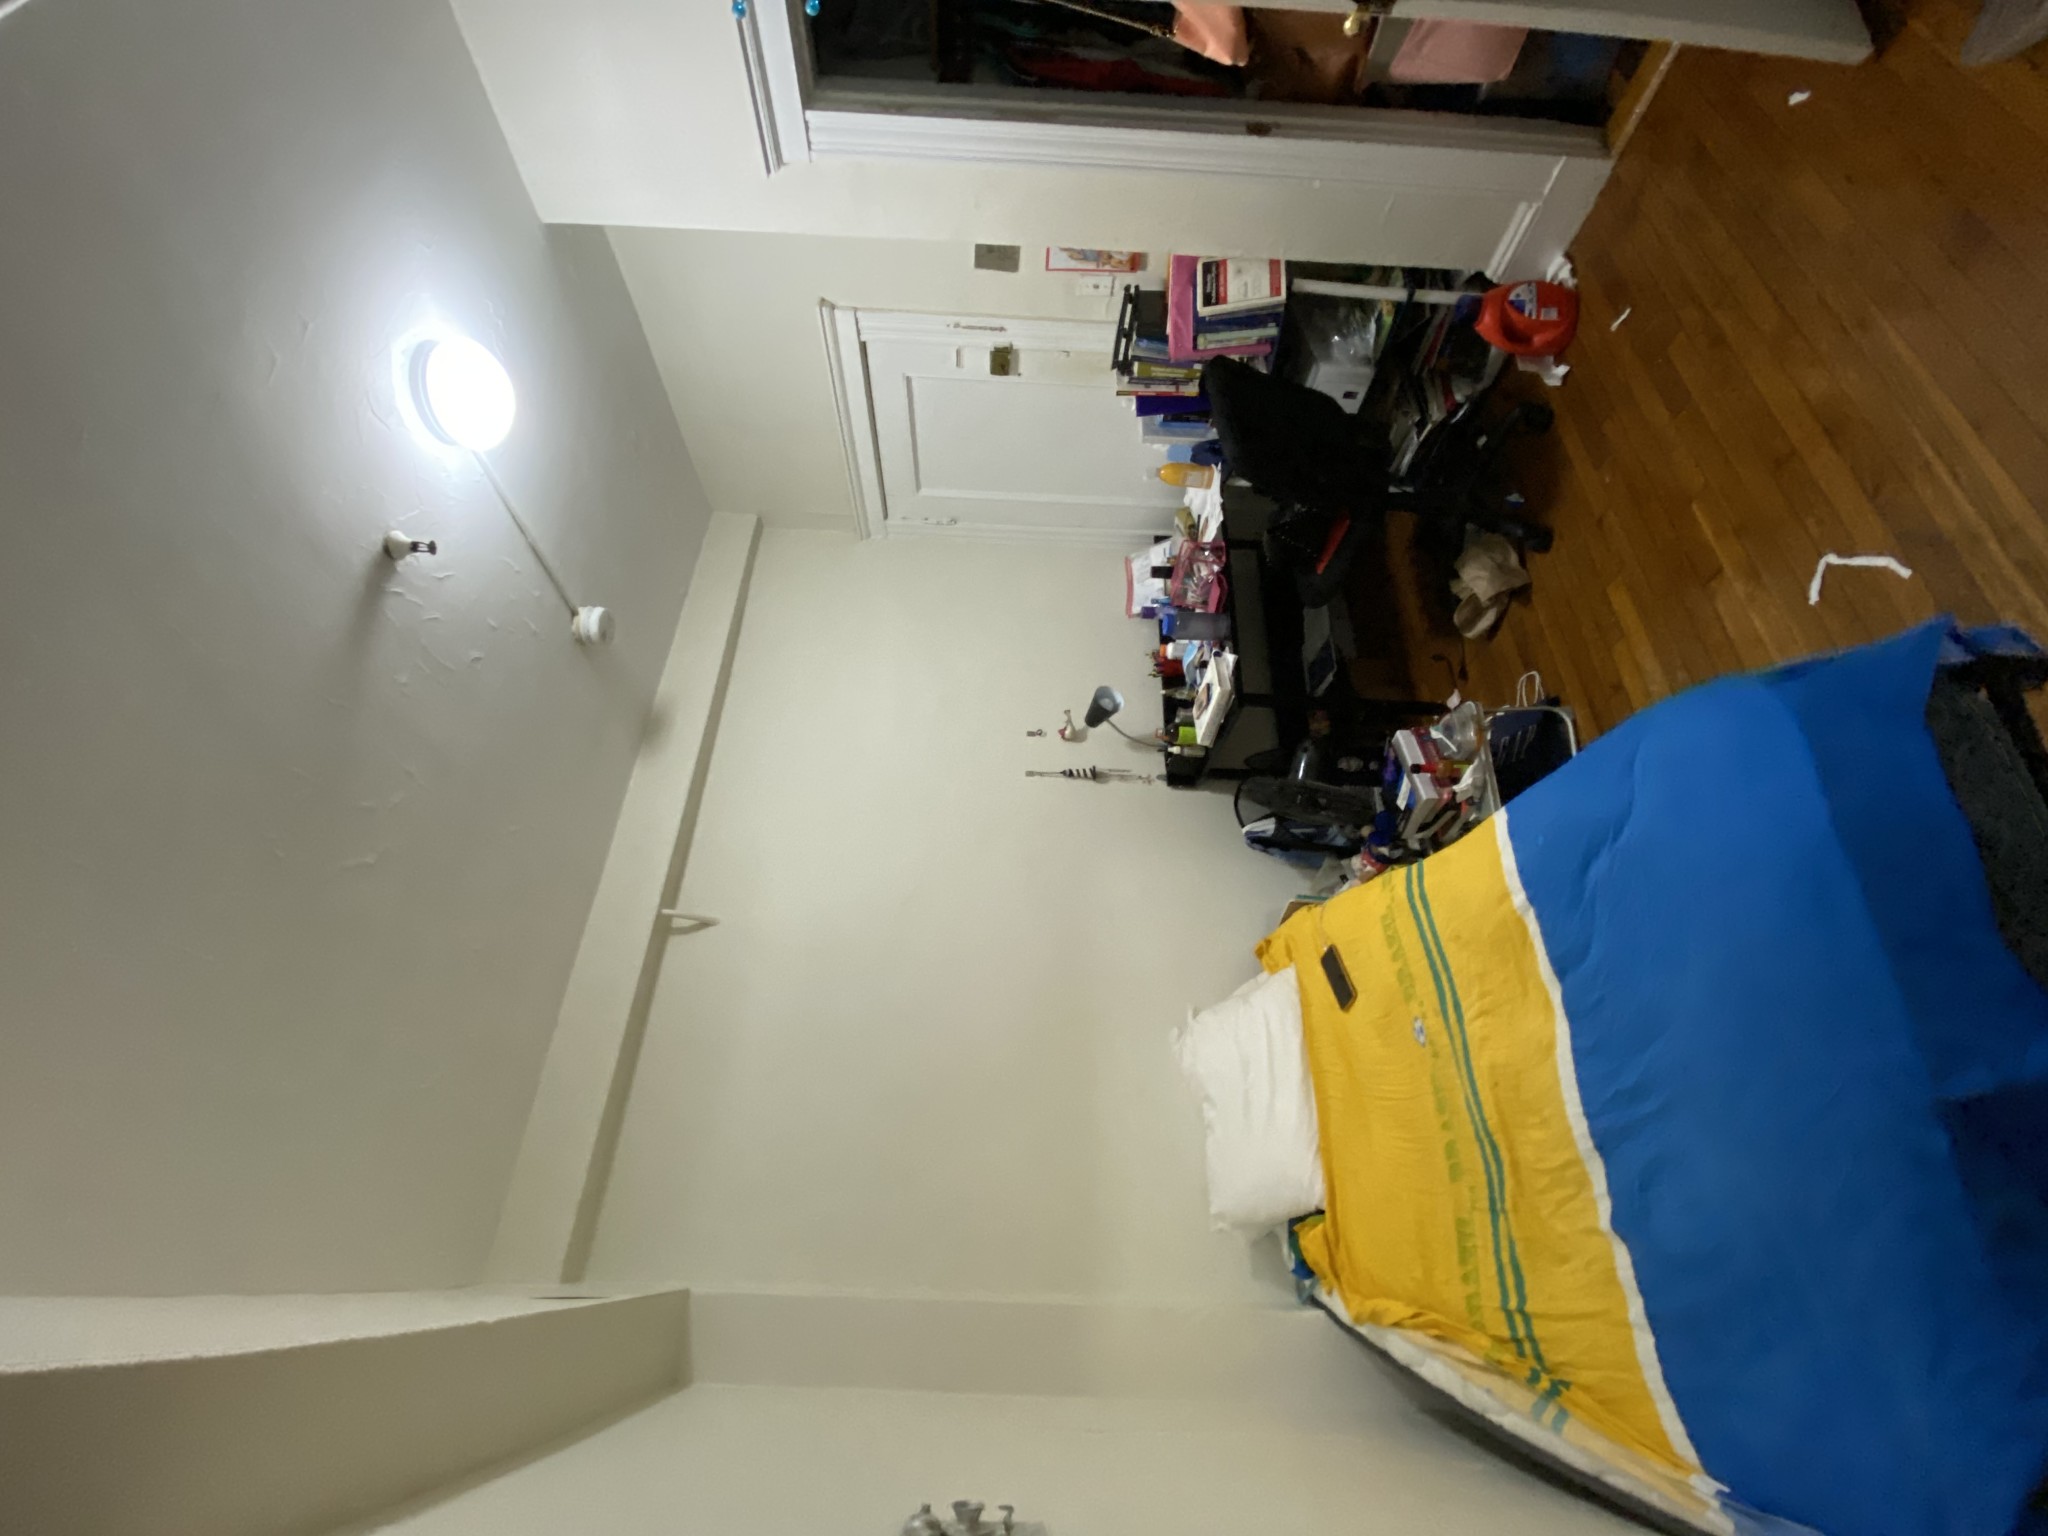 Photos of apartment on Sutherland Rd.,Boston MA 02135